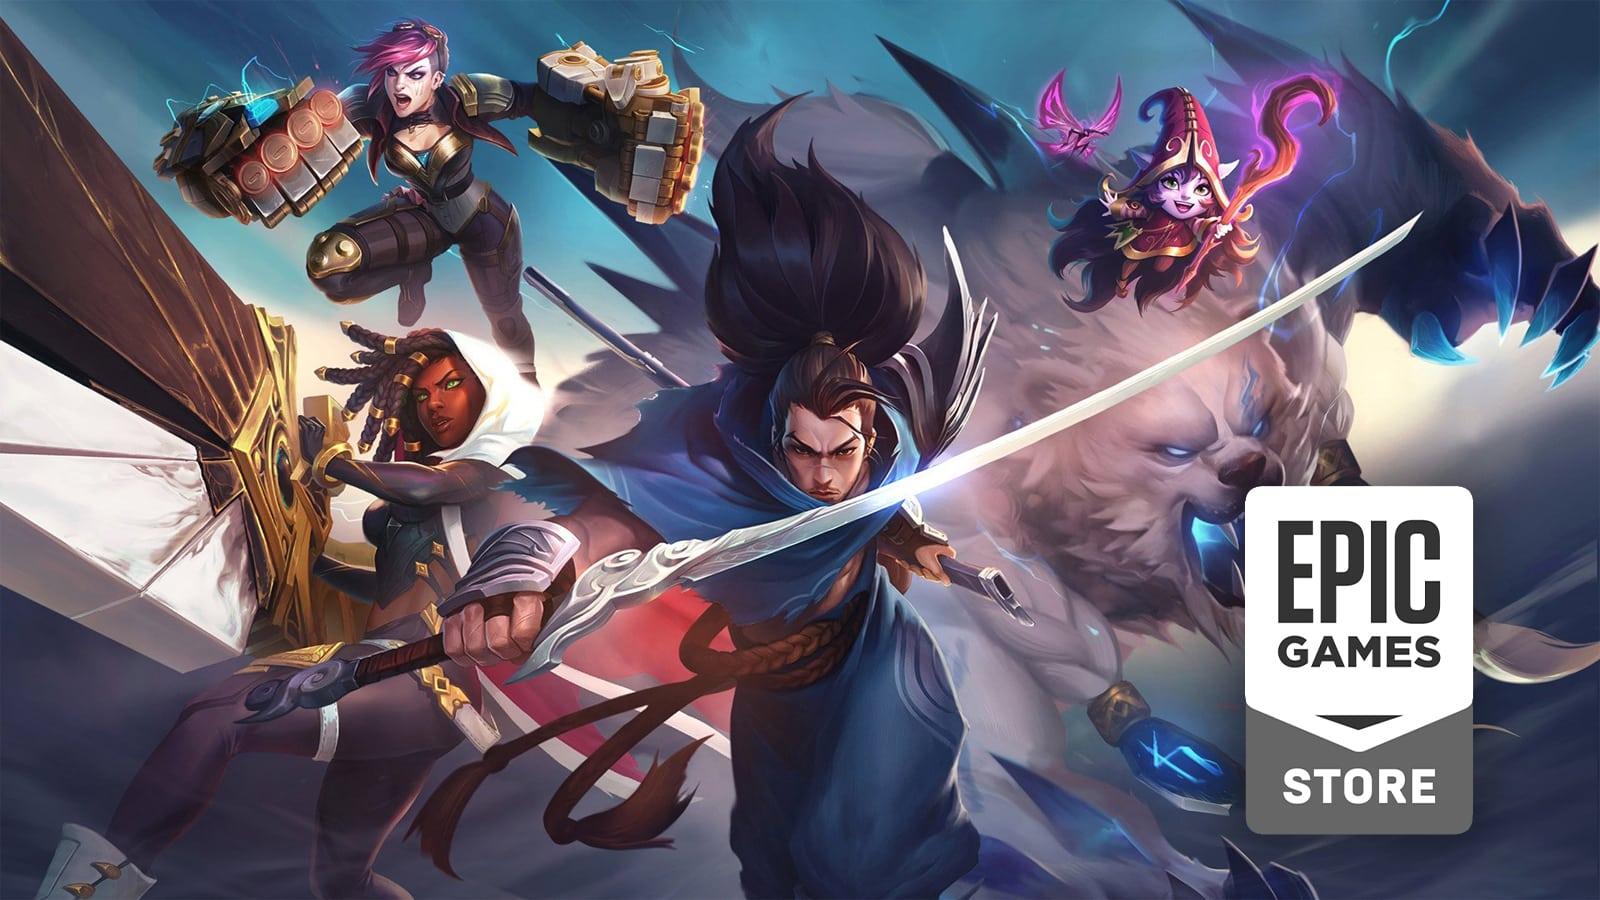 When will the partnership between Riot Games and Twitch end? Free RP and  skins for LoL and Valorant coming to an end - Meristation